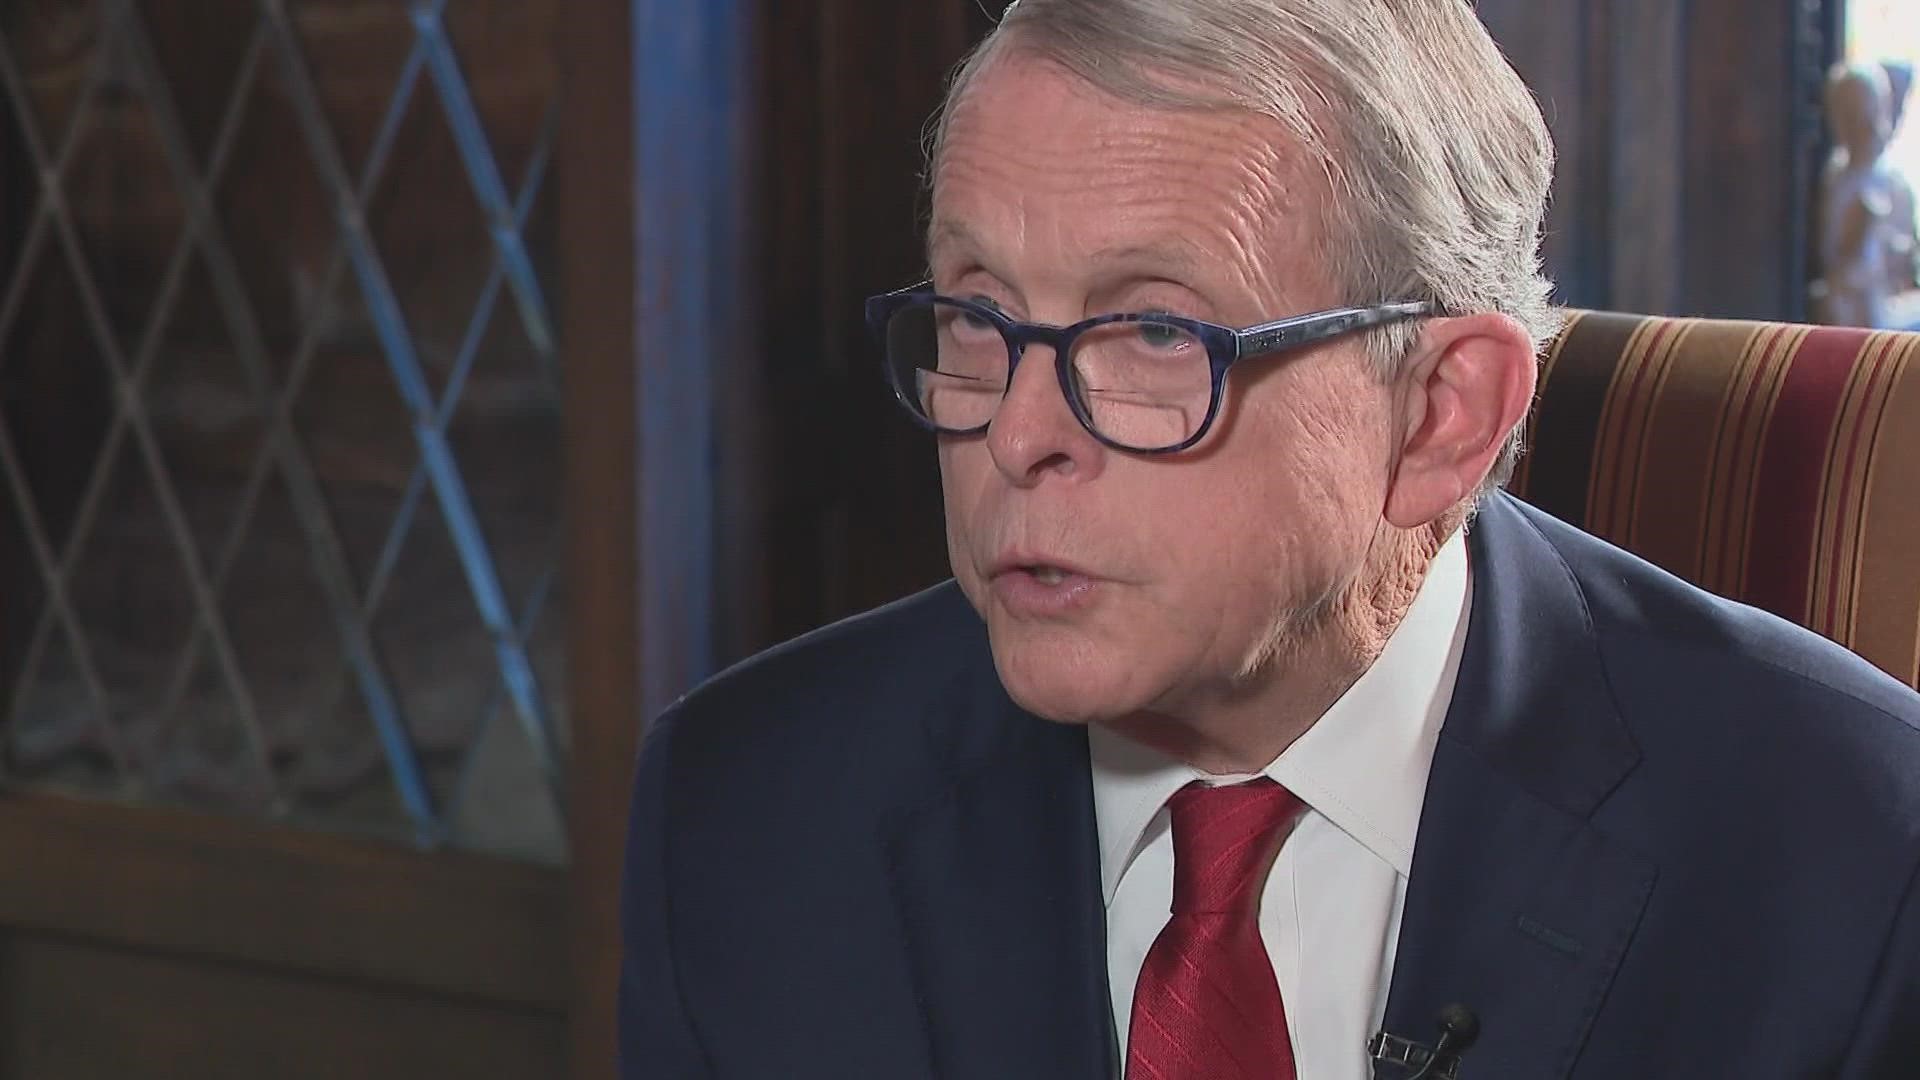 Gov. Mike DeWine will be sworn in for his last term on Jan. 9 at the Ohio Statehouse.